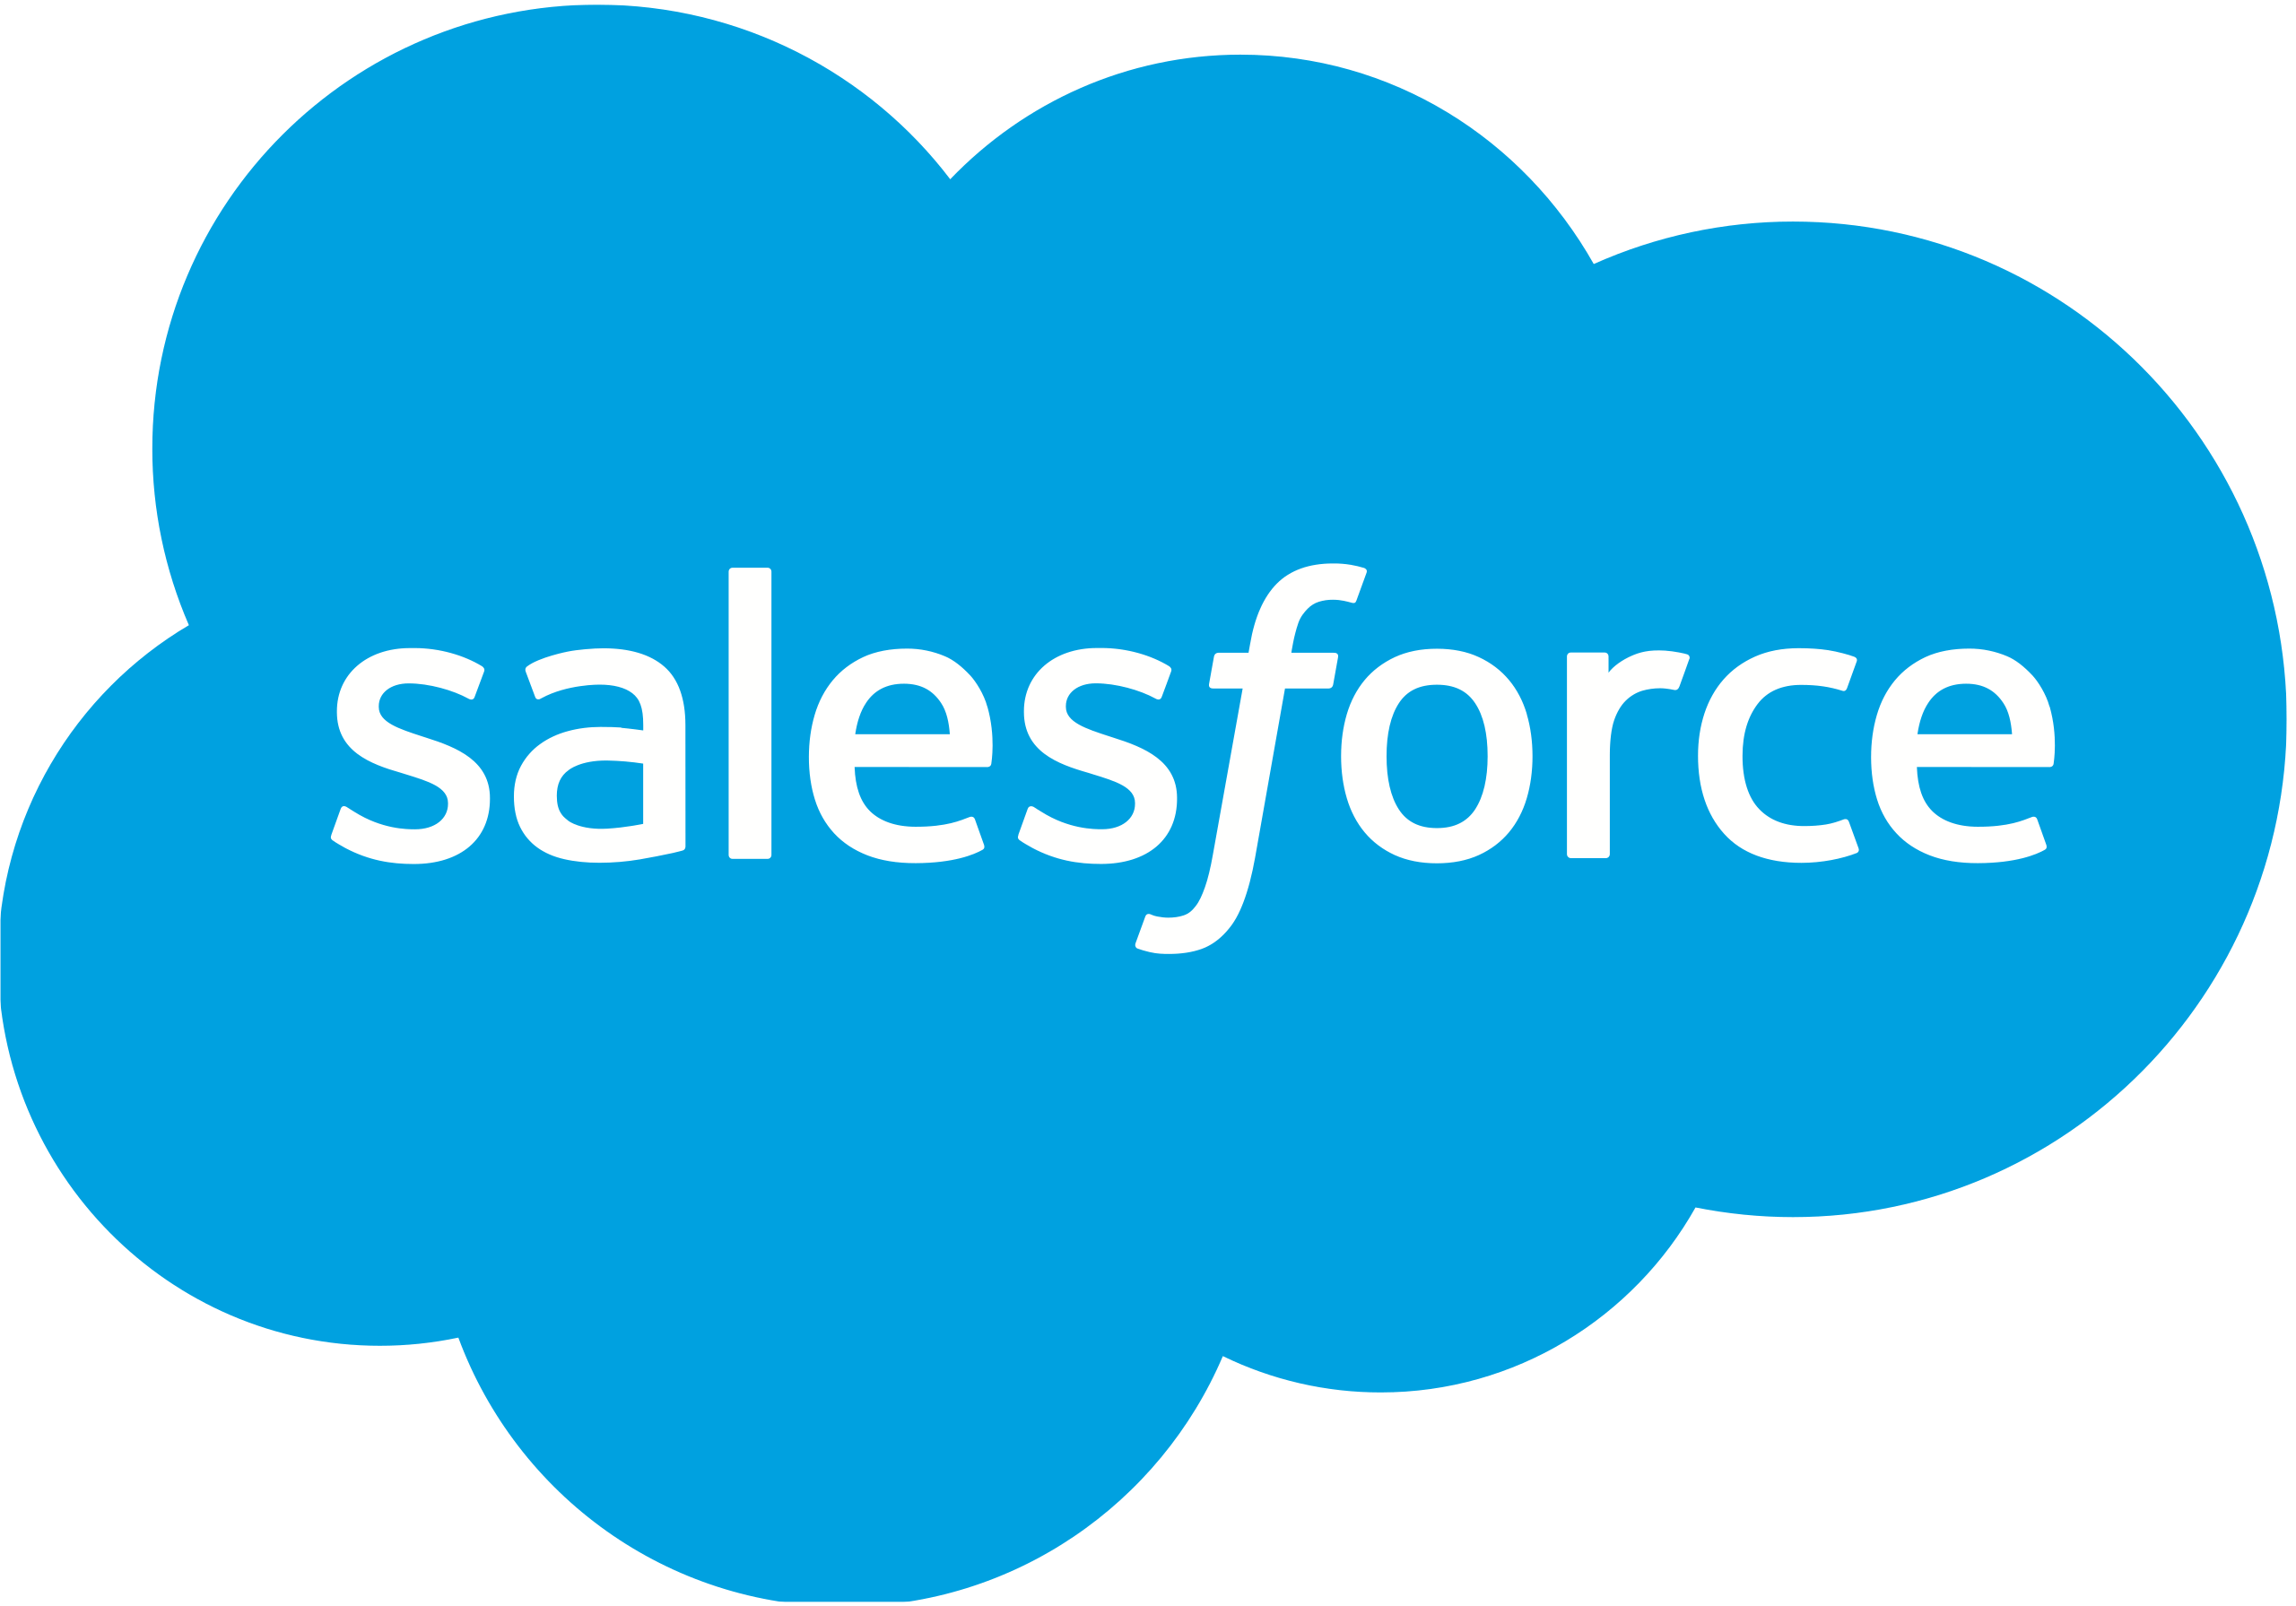 Clear logo for Saleforce